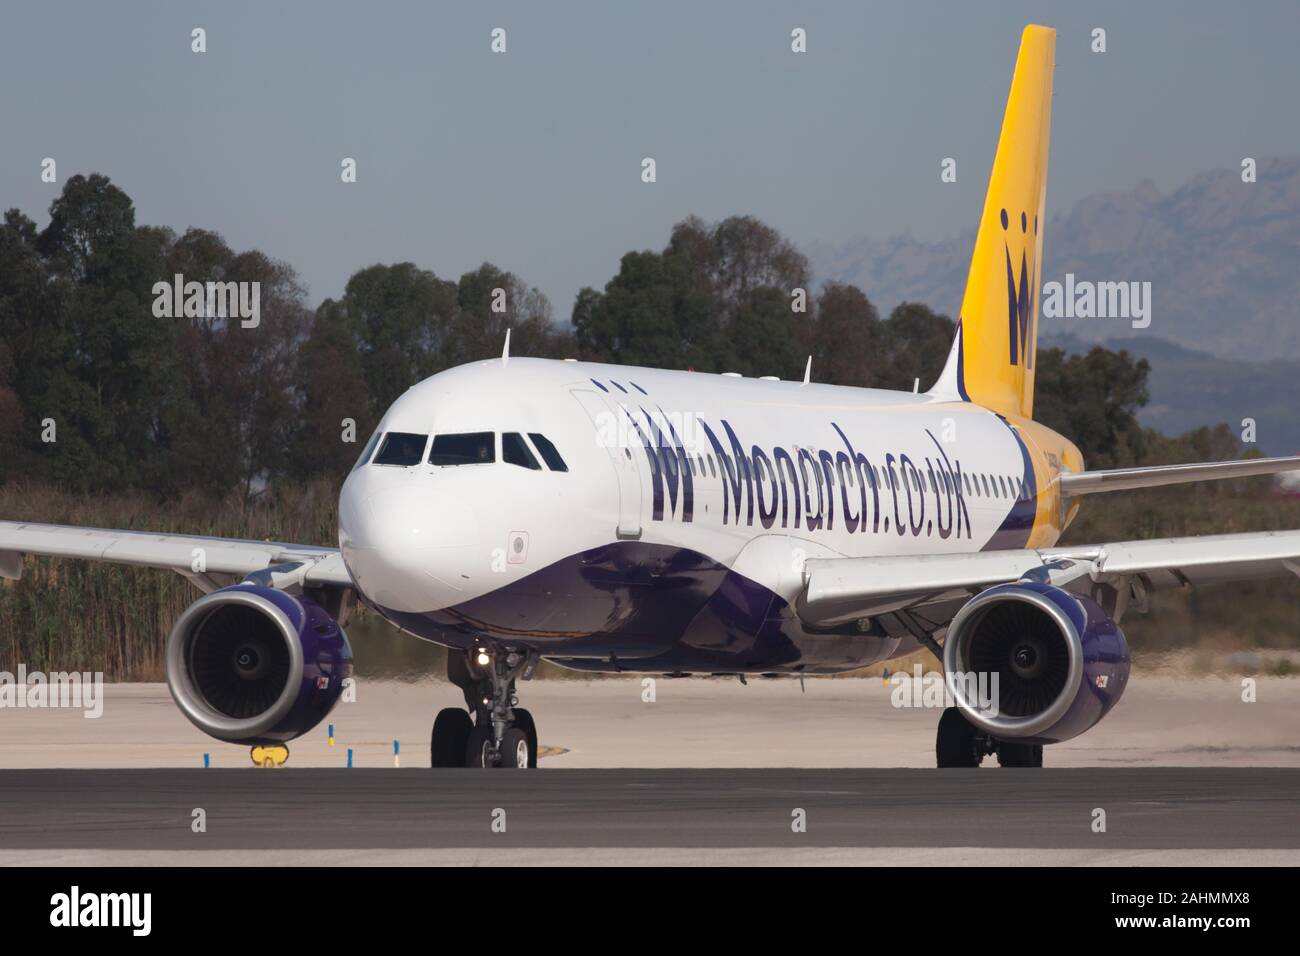 Barcelona, Spain - August 11, 2017: Monarch Airlines Airbus A320-200 on the taxiway at El Prat Airport in Barcelona, Spain. Stock Photo